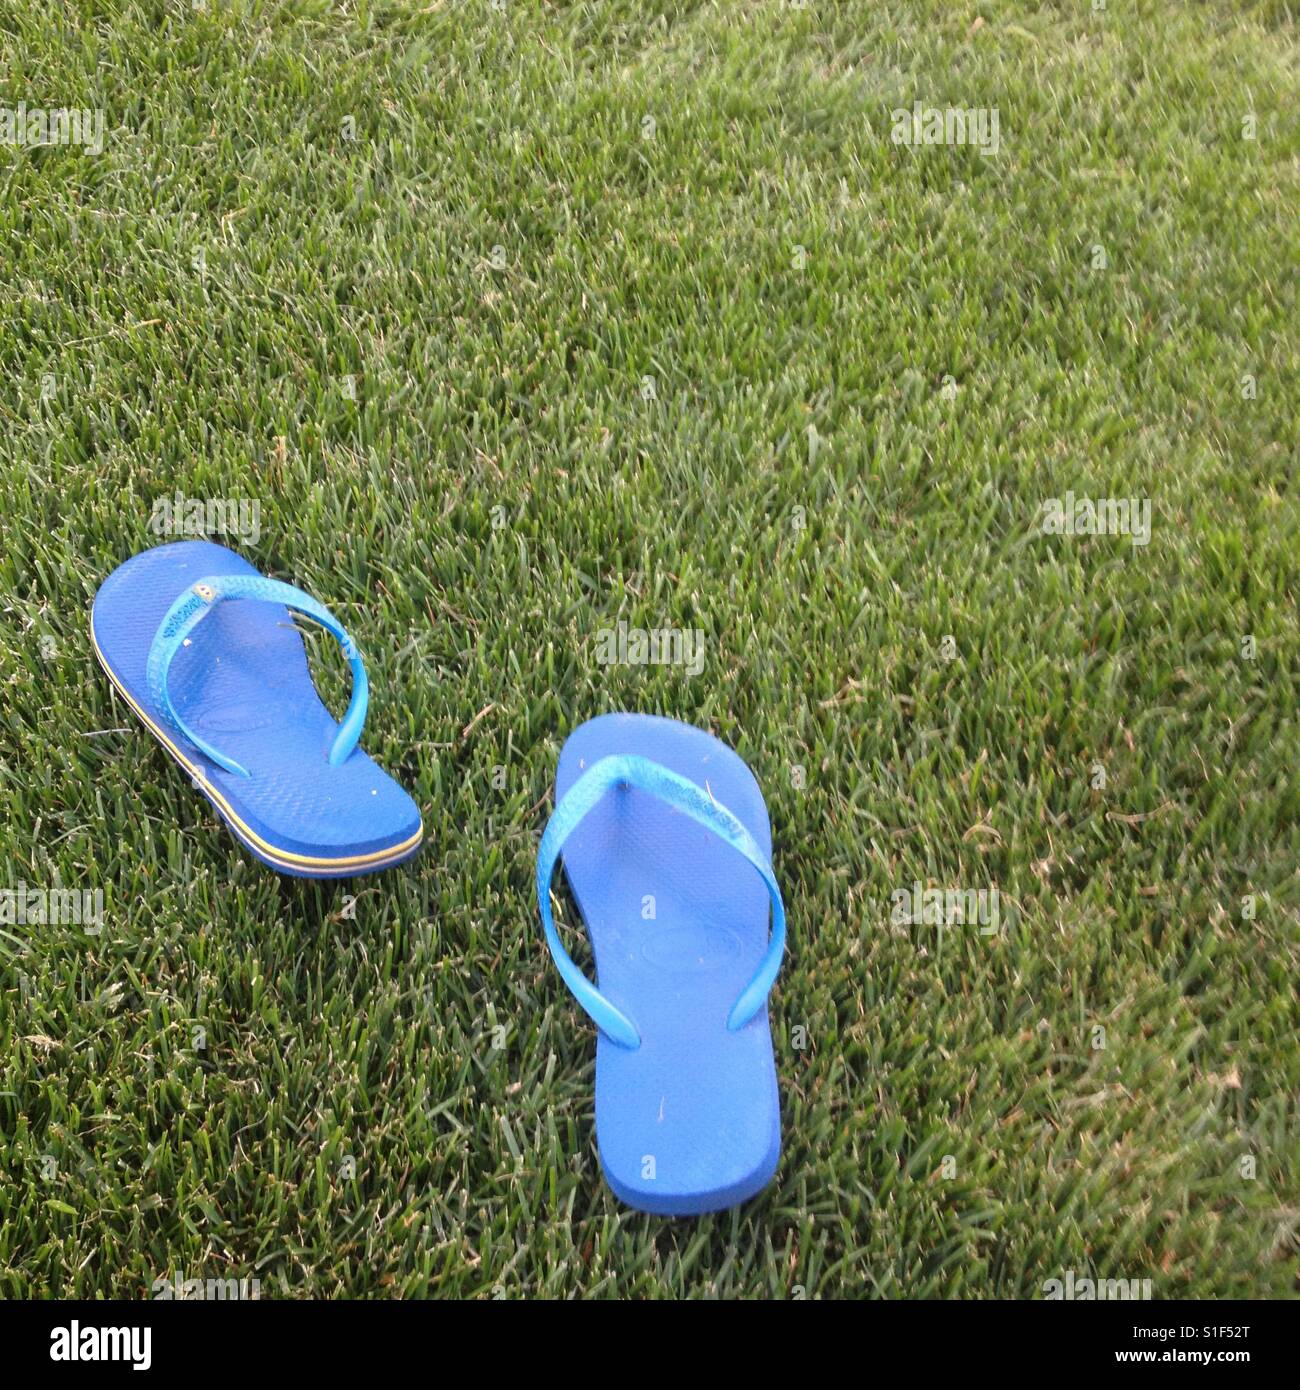 Havaianas bue flip flops on green grass, Summer day, vacation, time off, relaxing, taking a break, winding down, nobody around, peaceful. Stock Photo